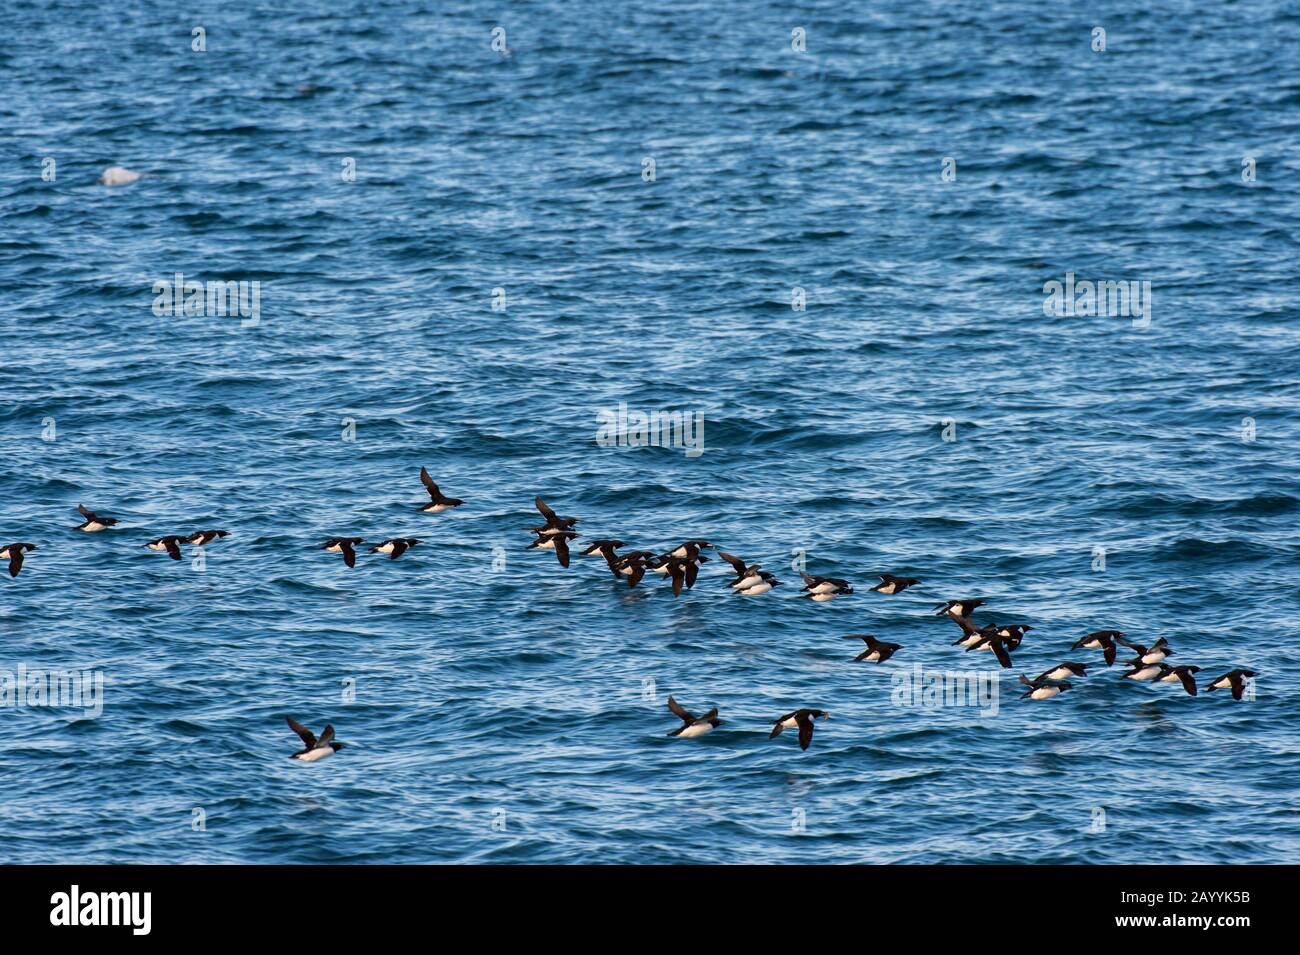 A flock of Thick-billed murres or Brünnich's guillemot (Uria lomvia) flying over the Arctic Ocean near Alkefjellet, which one of the largest bird clif Stock Photo